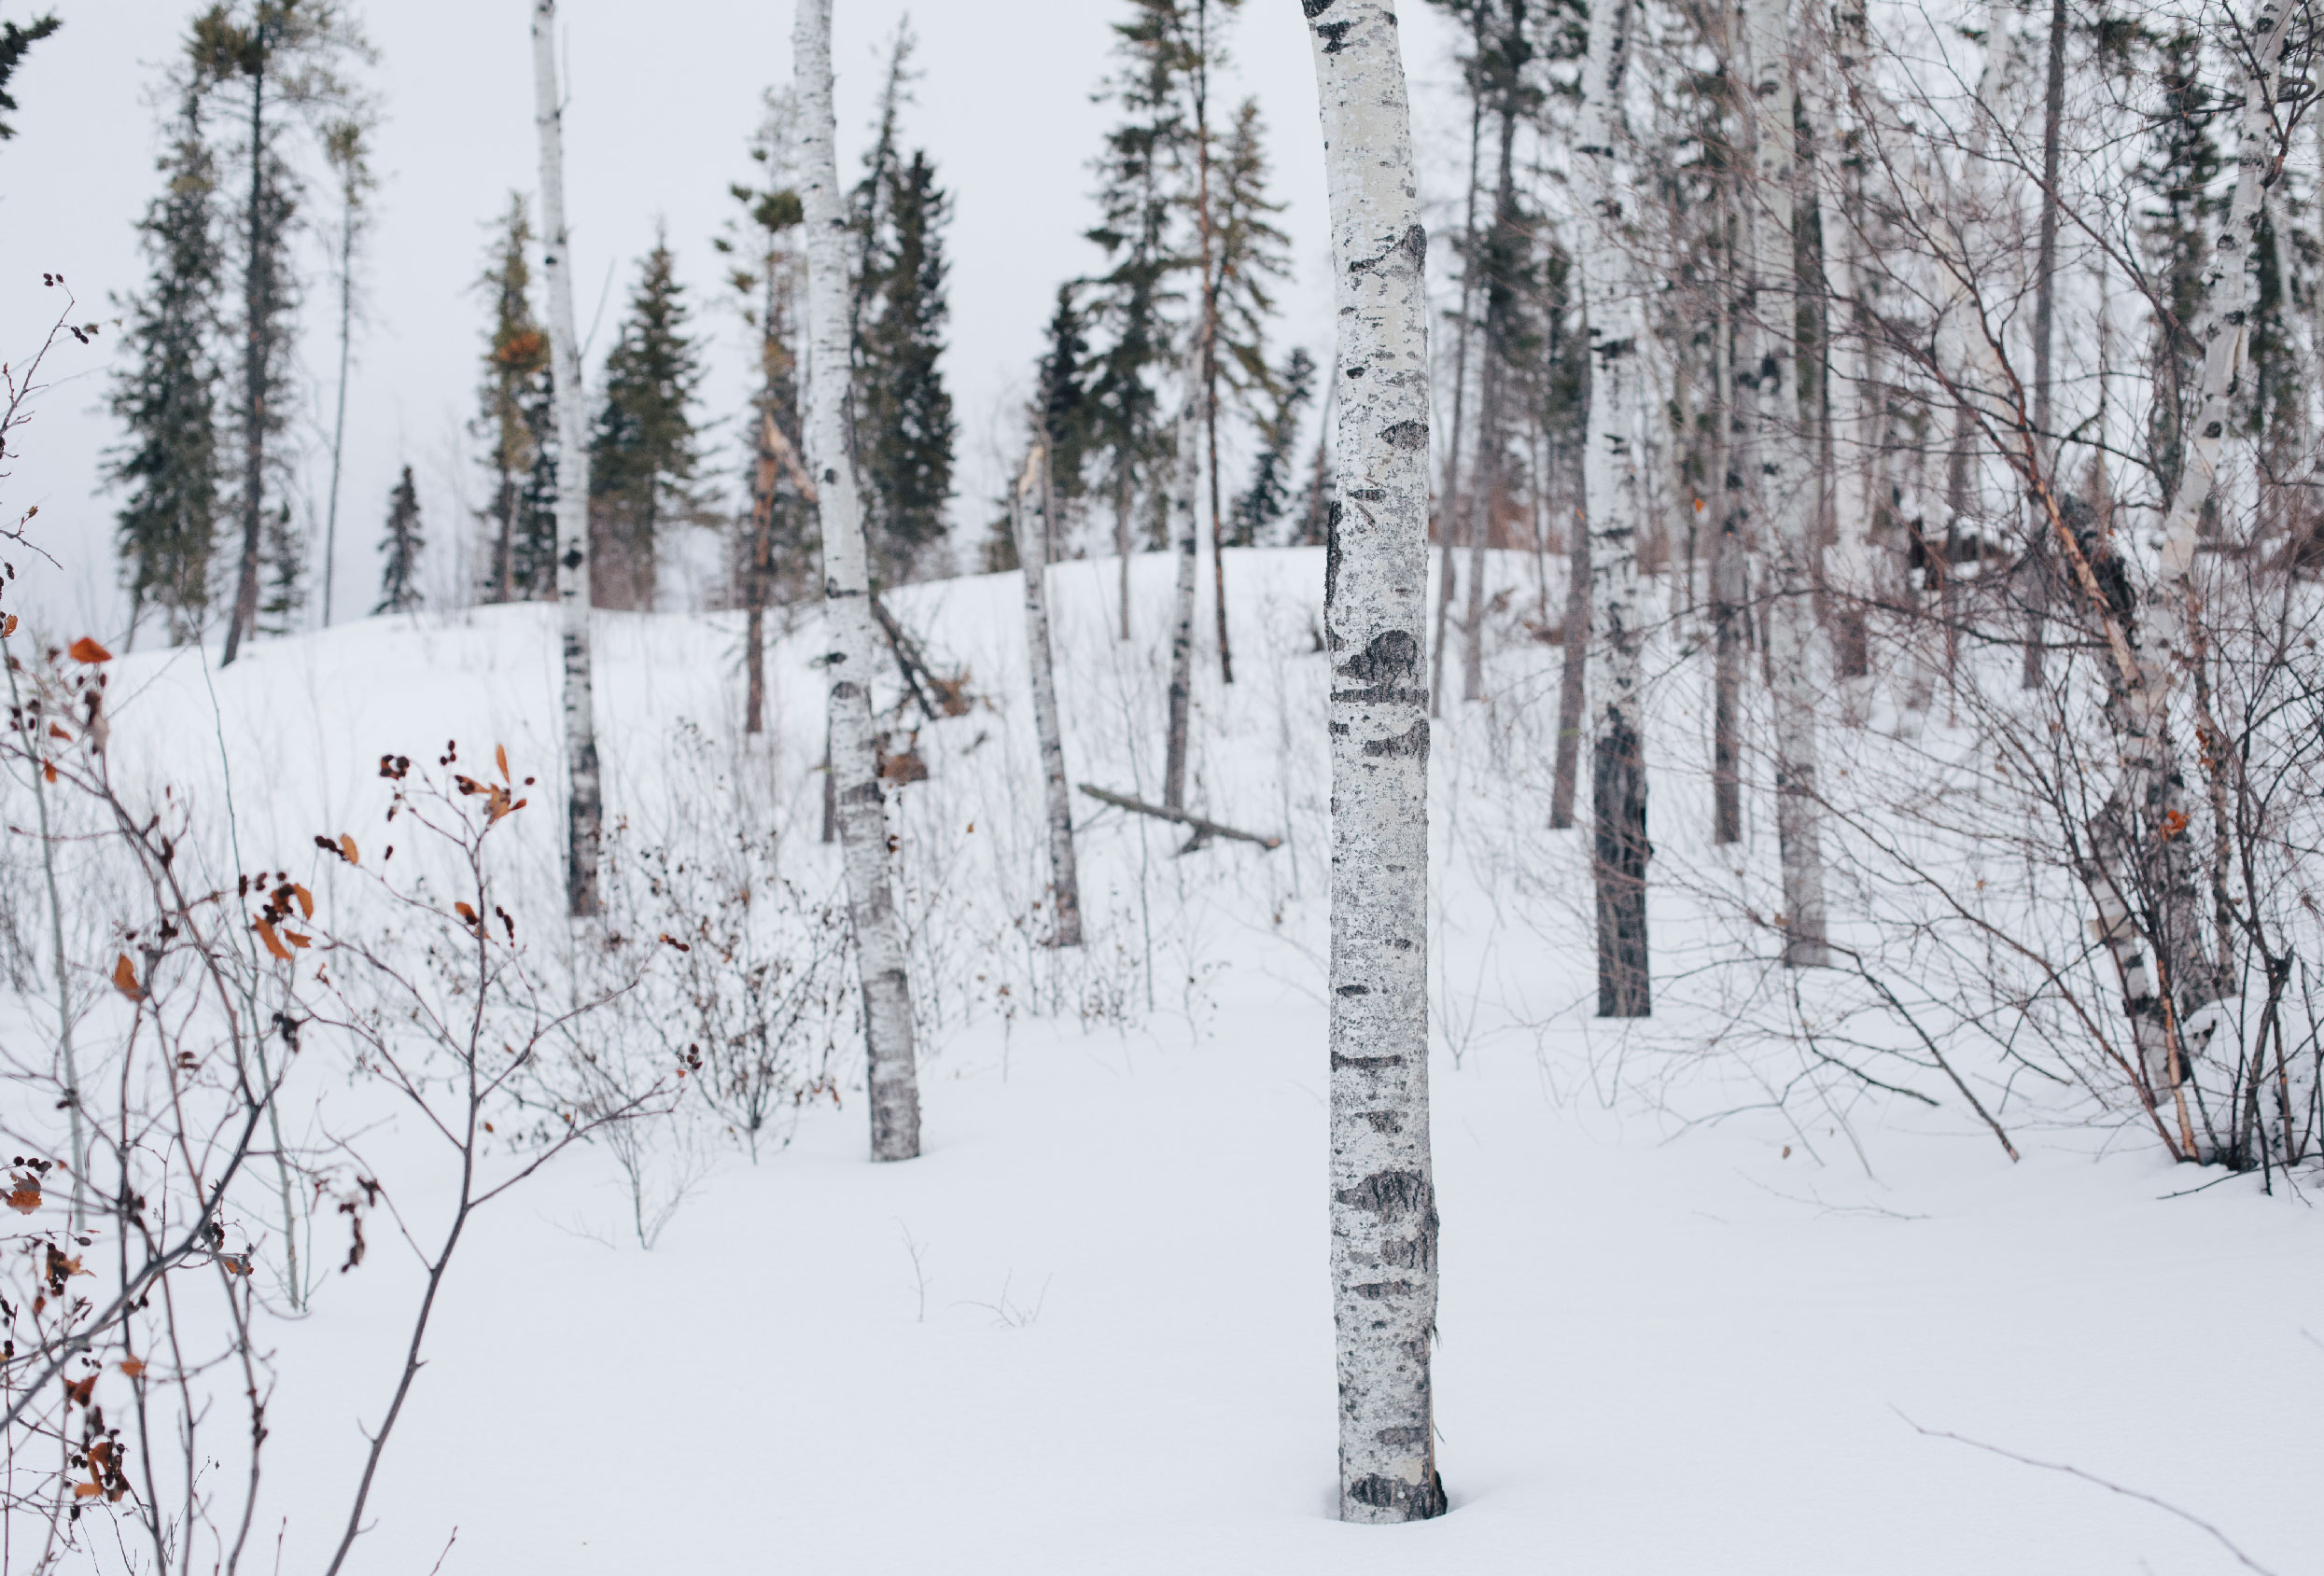 White birch trees stand in a snowy landscape.